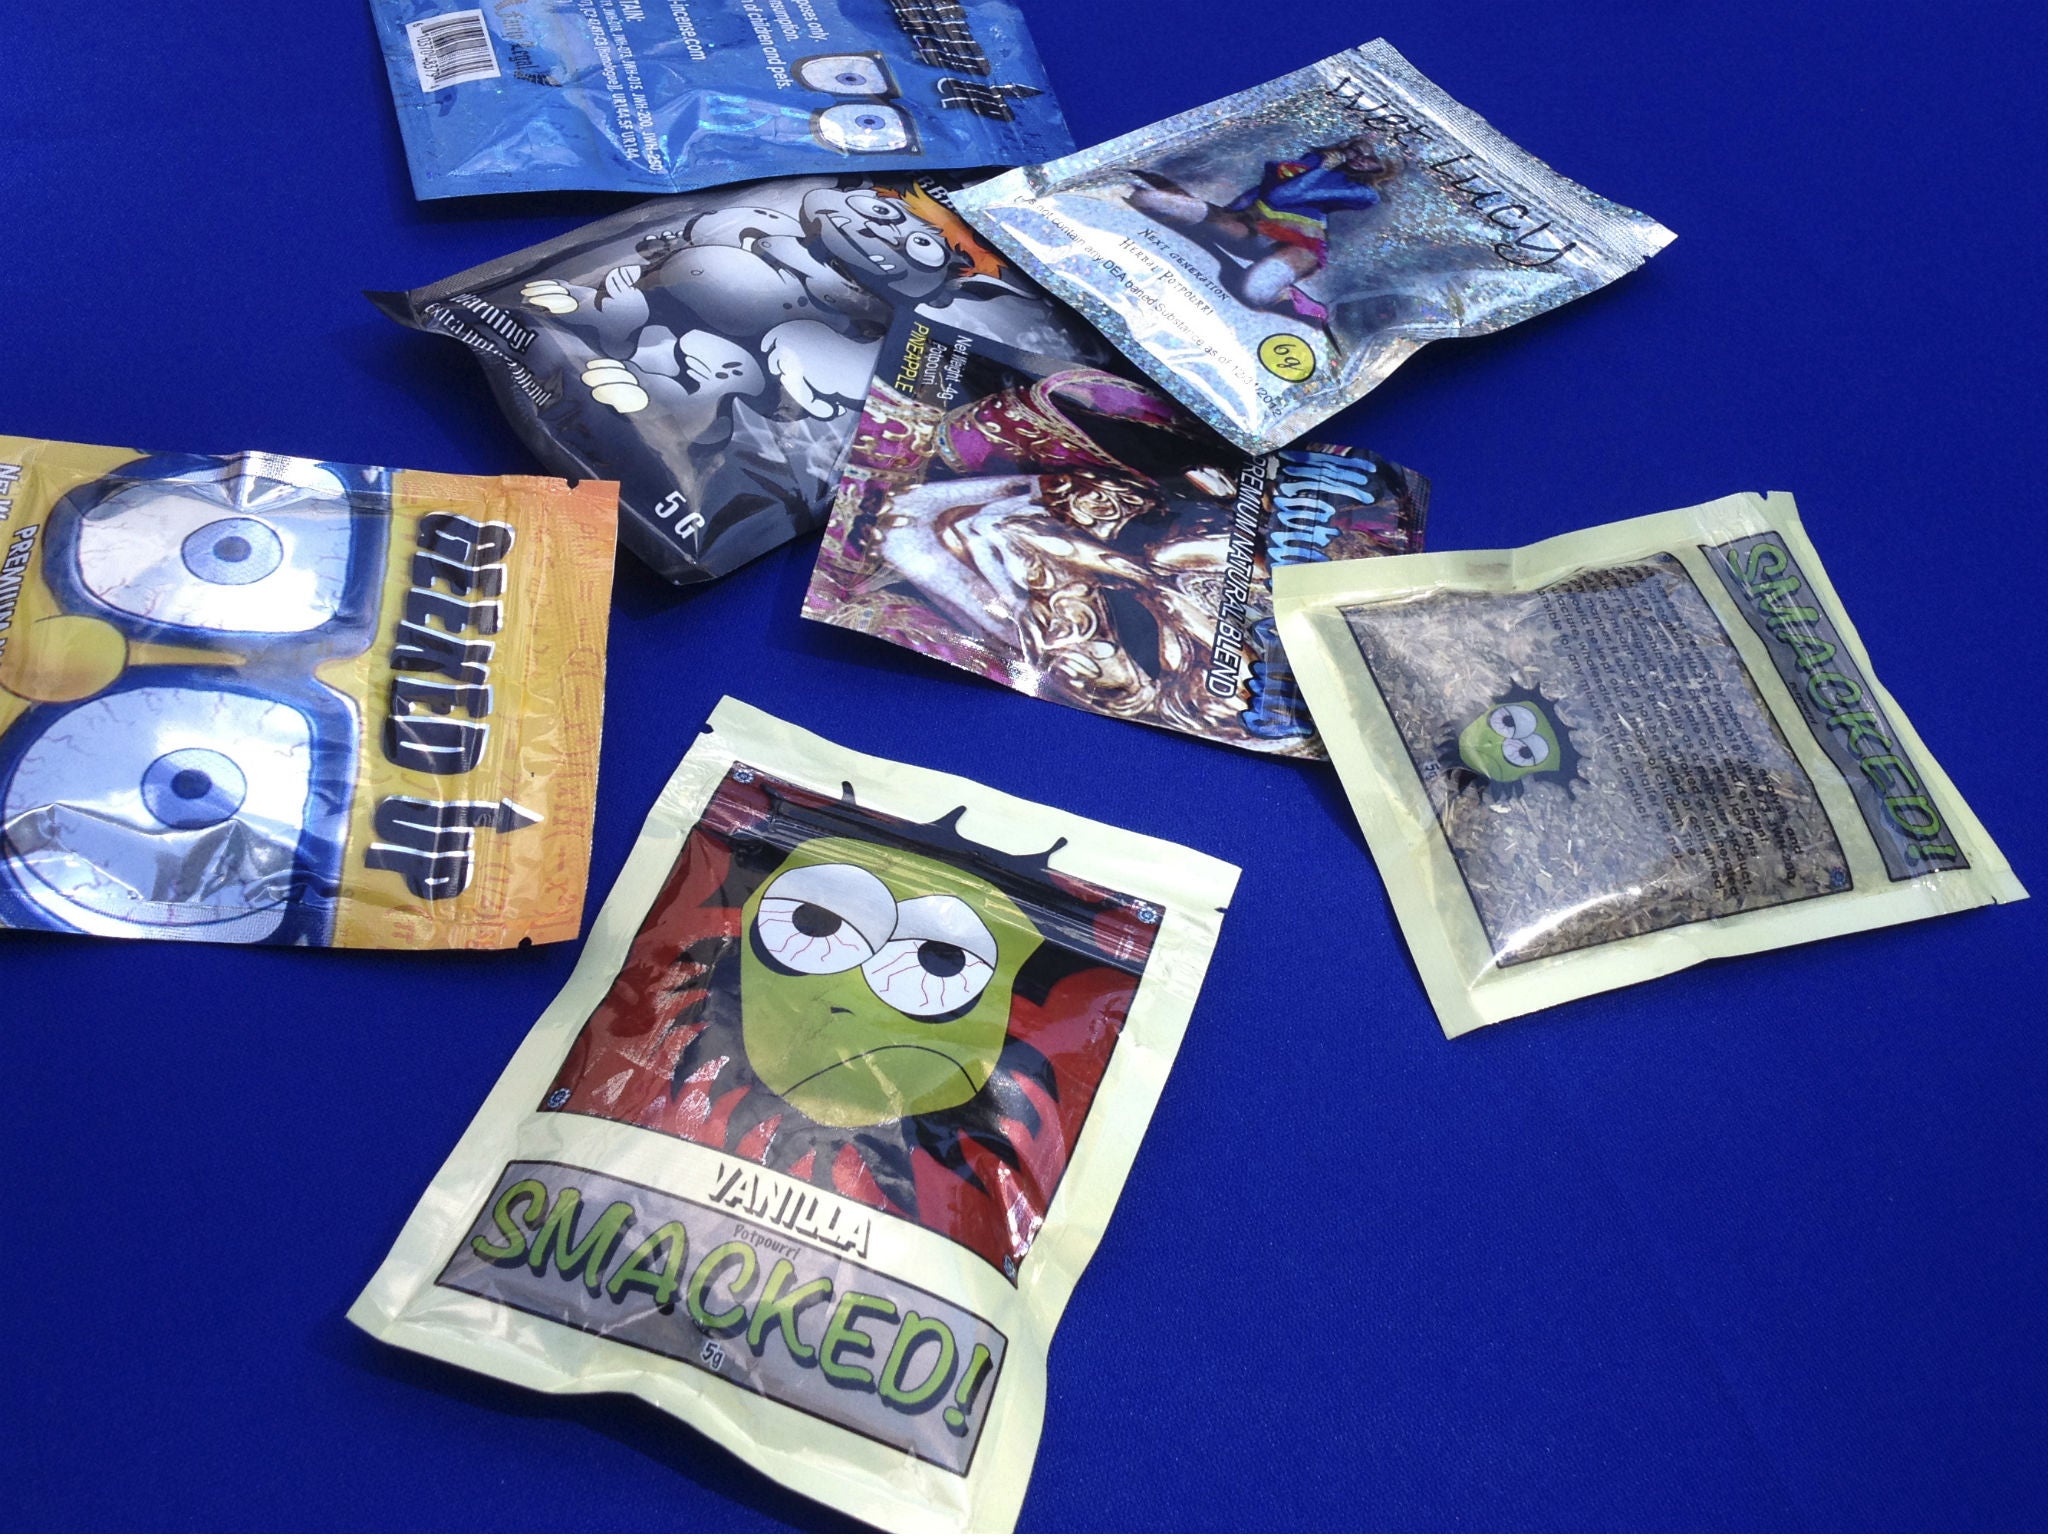 Packets of synthetic marijuana illegally sold in New York City are put on display at a news conference